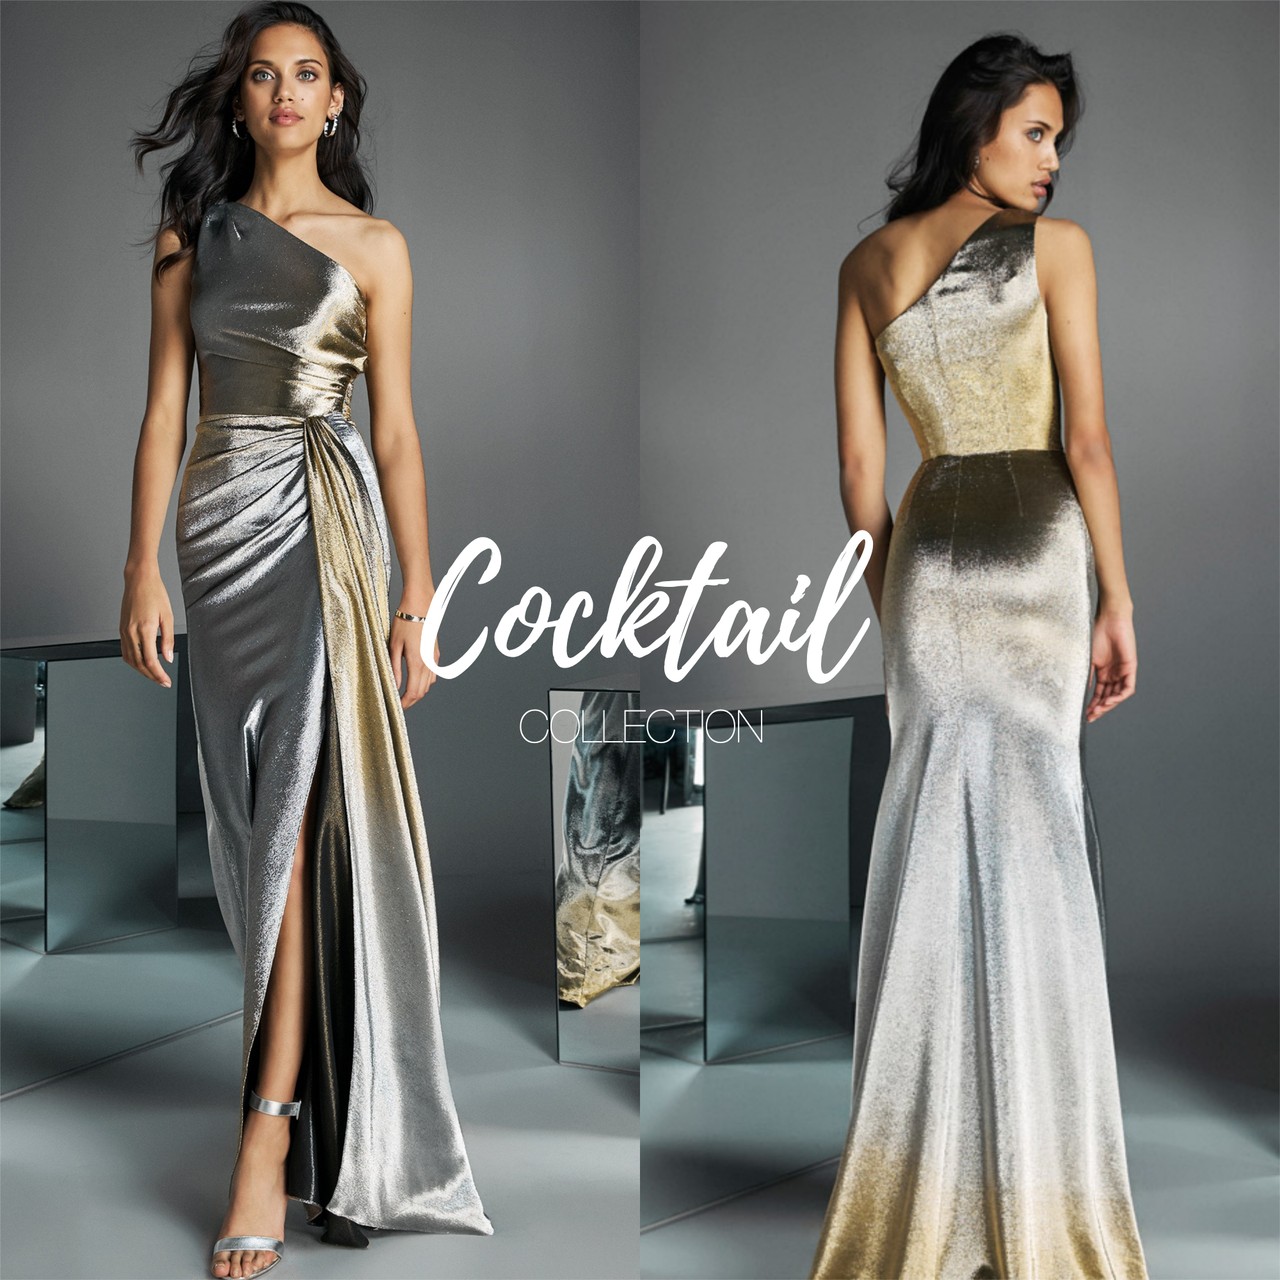 TM Style 72 - Cocktail Collection